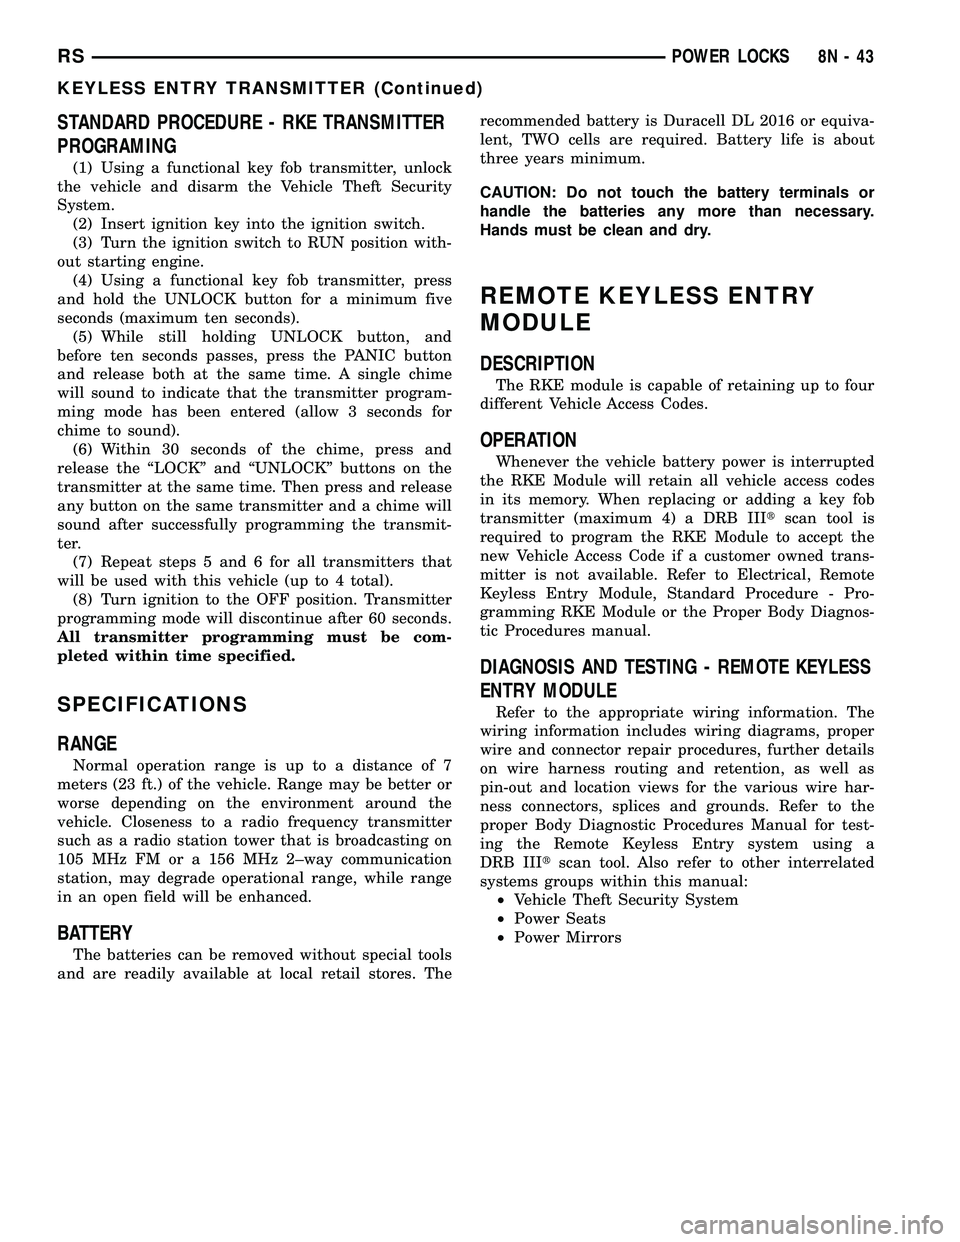 DODGE TOWN AND COUNTRY 2004  Service Manual STANDARD PROCEDURE - RKE TRANSMITTER
PROGRAMING
(1) Using a functional key fob transmitter, unlock
the vehicle and disarm the Vehicle Theft Security
System.
(2) Insert ignition key into the ignition s